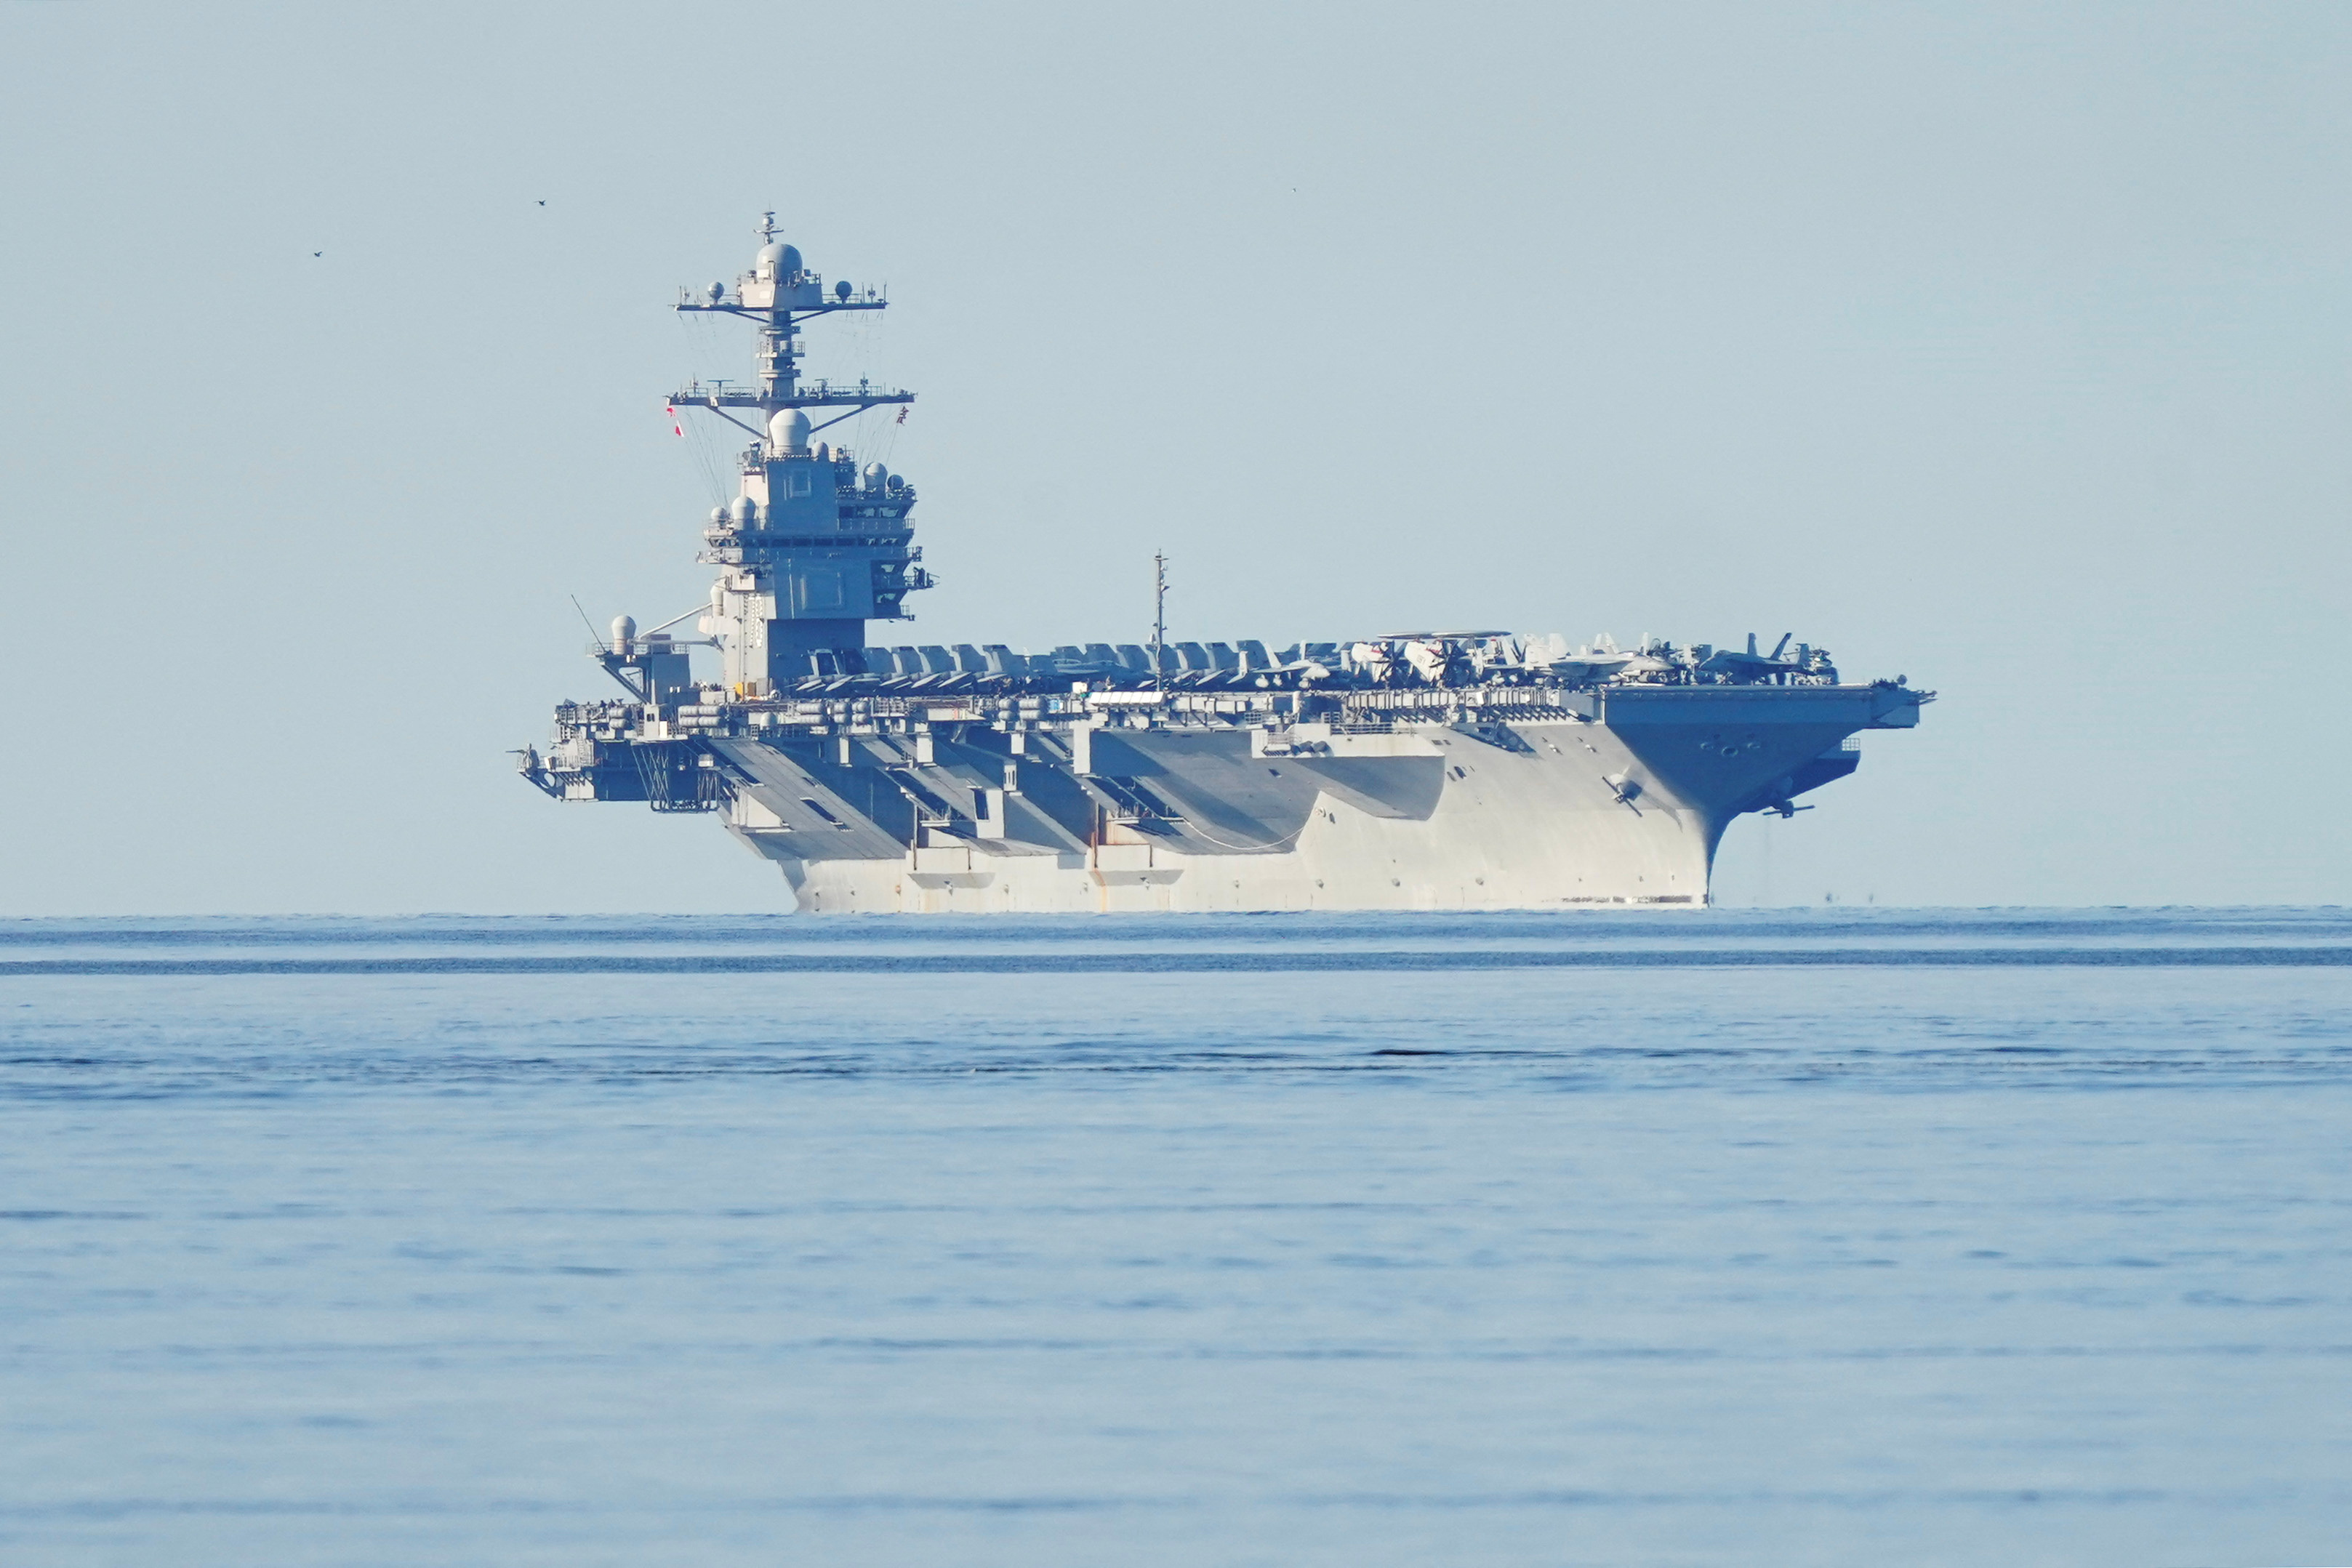 The aircraft carrier USS Gerald R. Ford at Jeloya